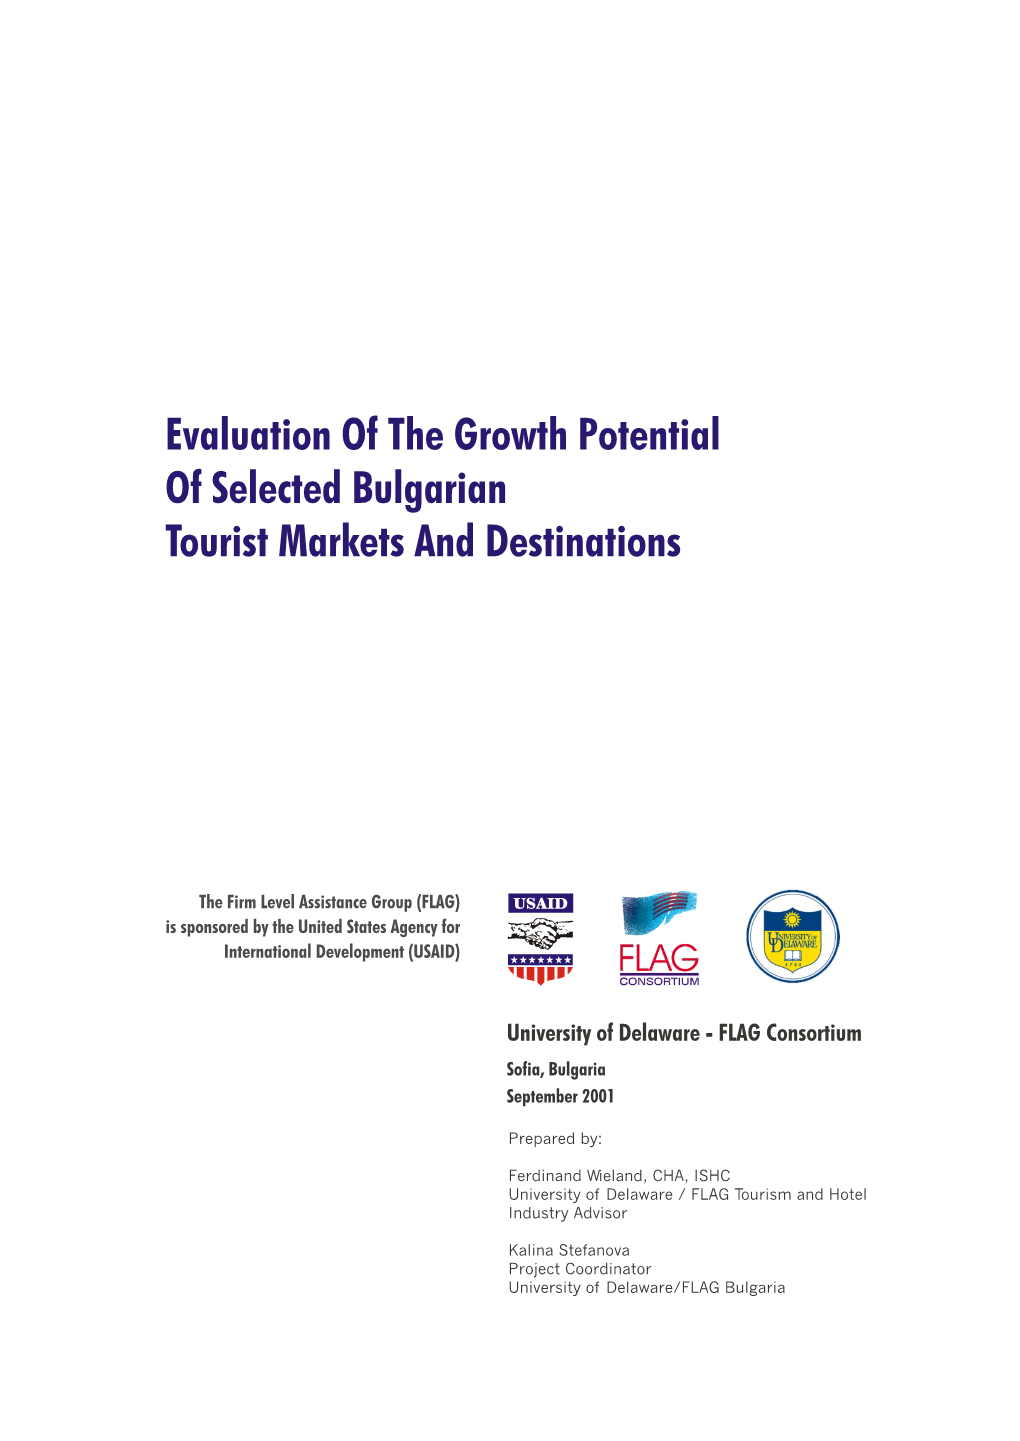 Evaluation of the Growth Potential of Selected Bulgarian Tourist Markets and Destinations